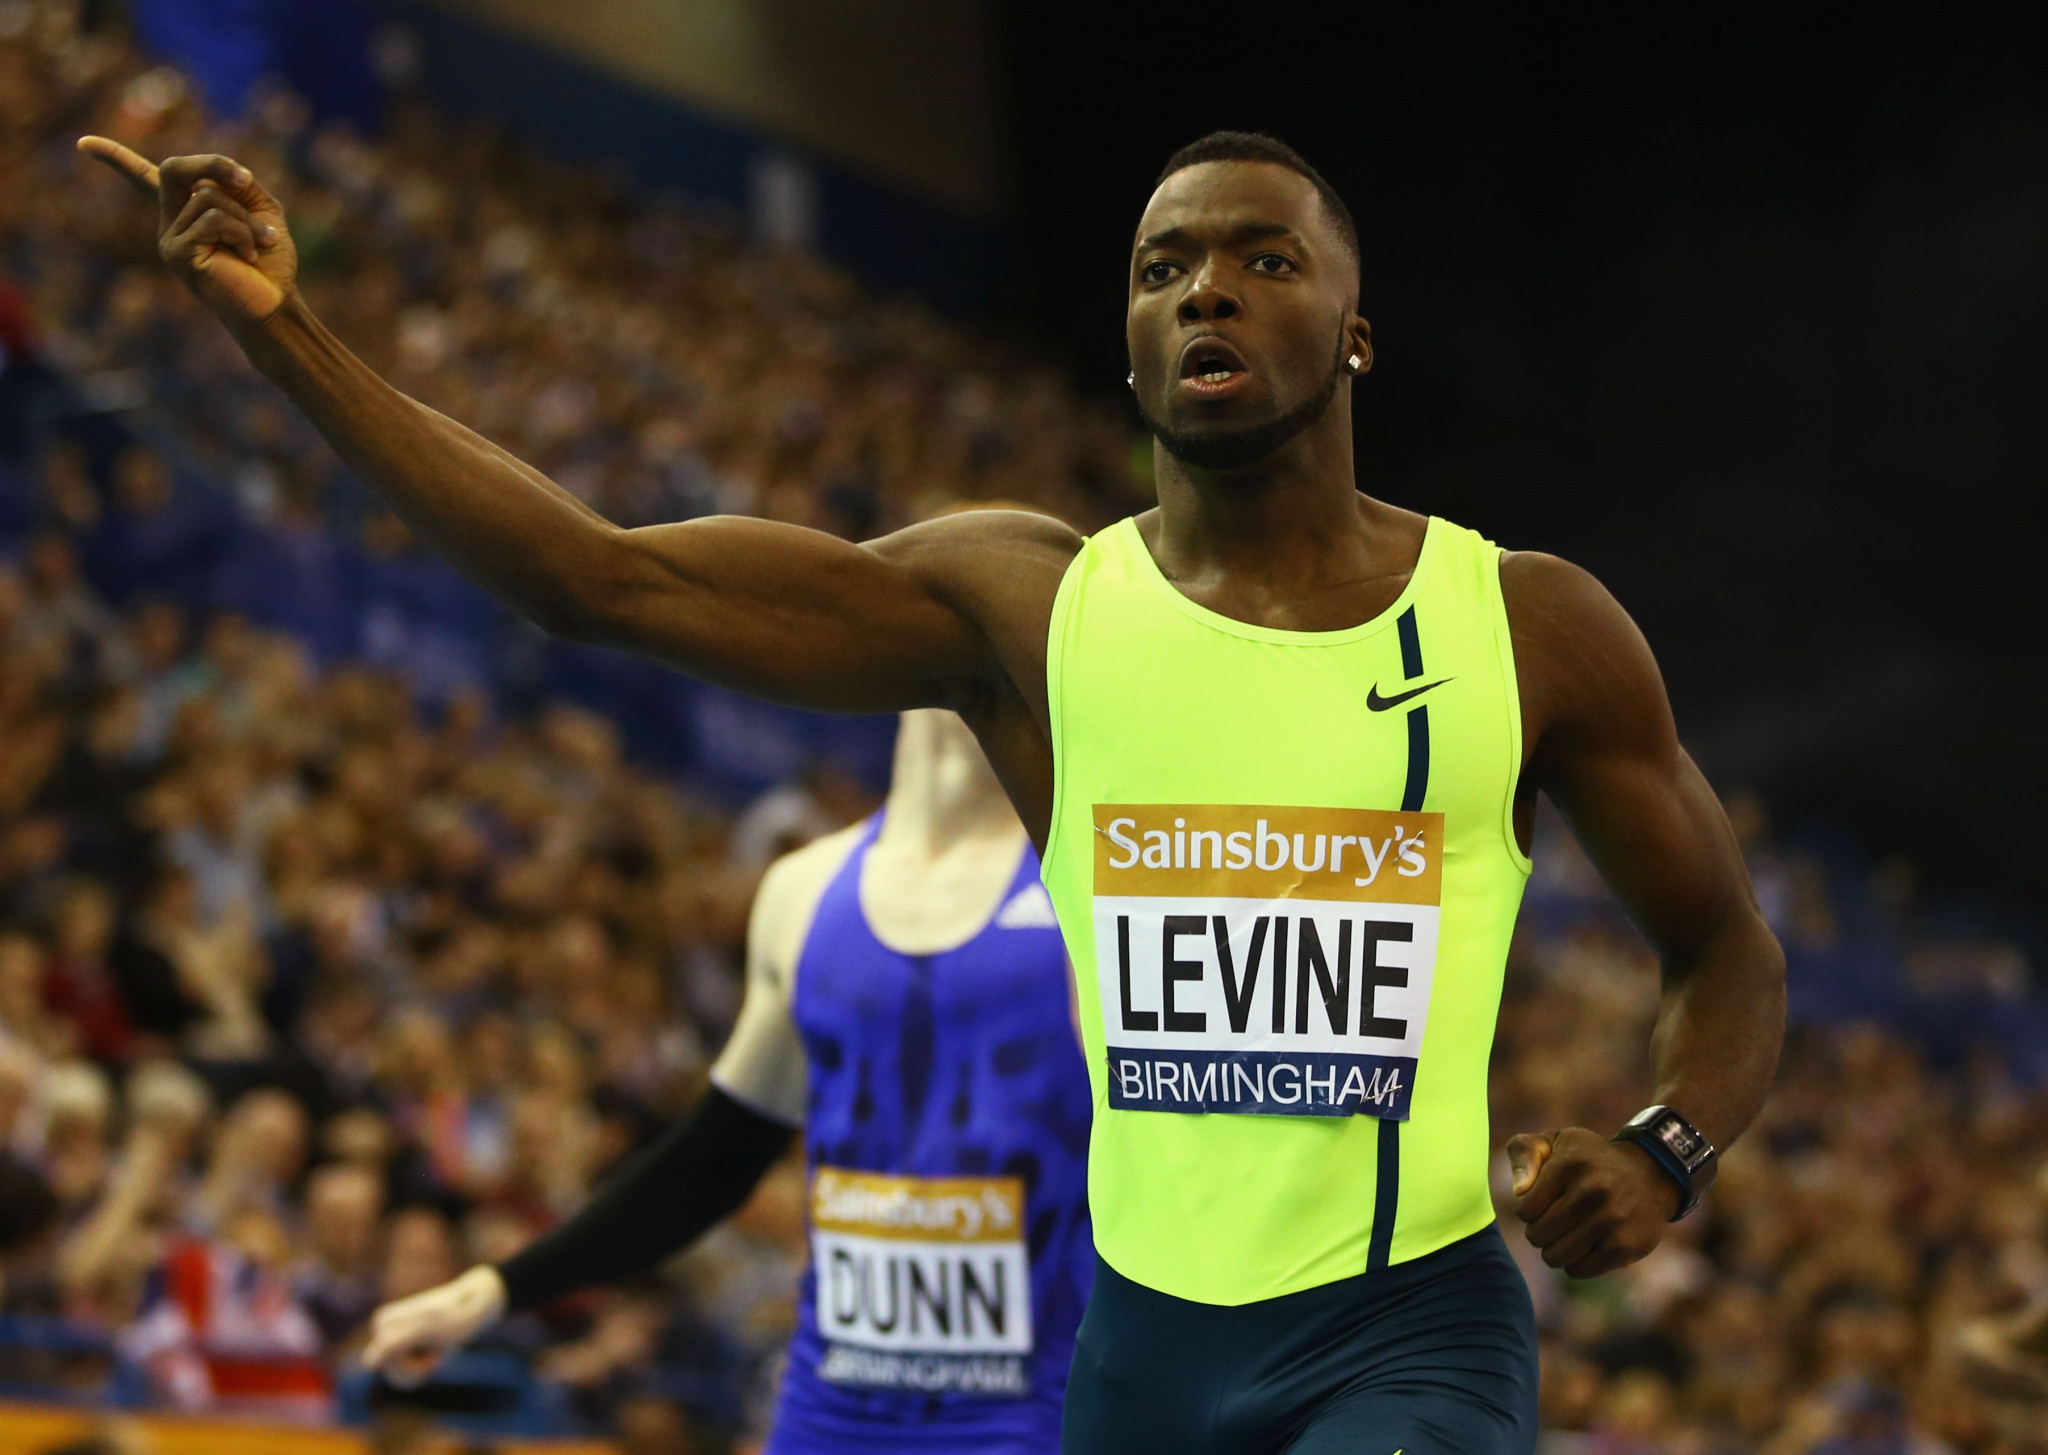 British sprinter Levine banned for four-years after positive drugs test